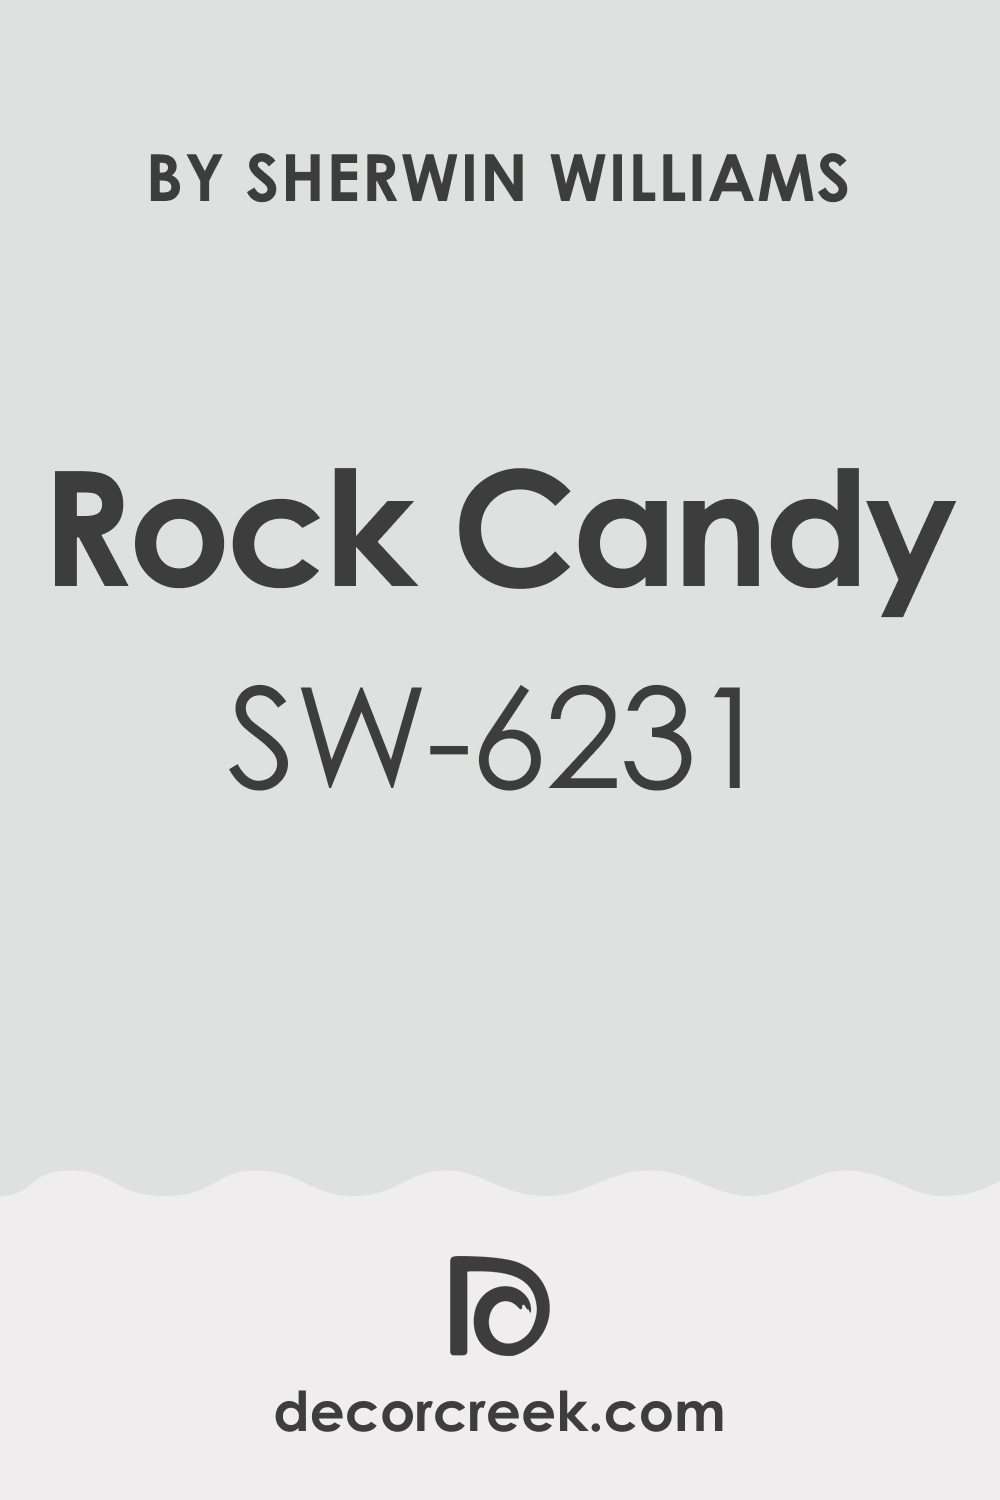 Rock Candy SW 6231 Paint Color by Sherwin-Williams